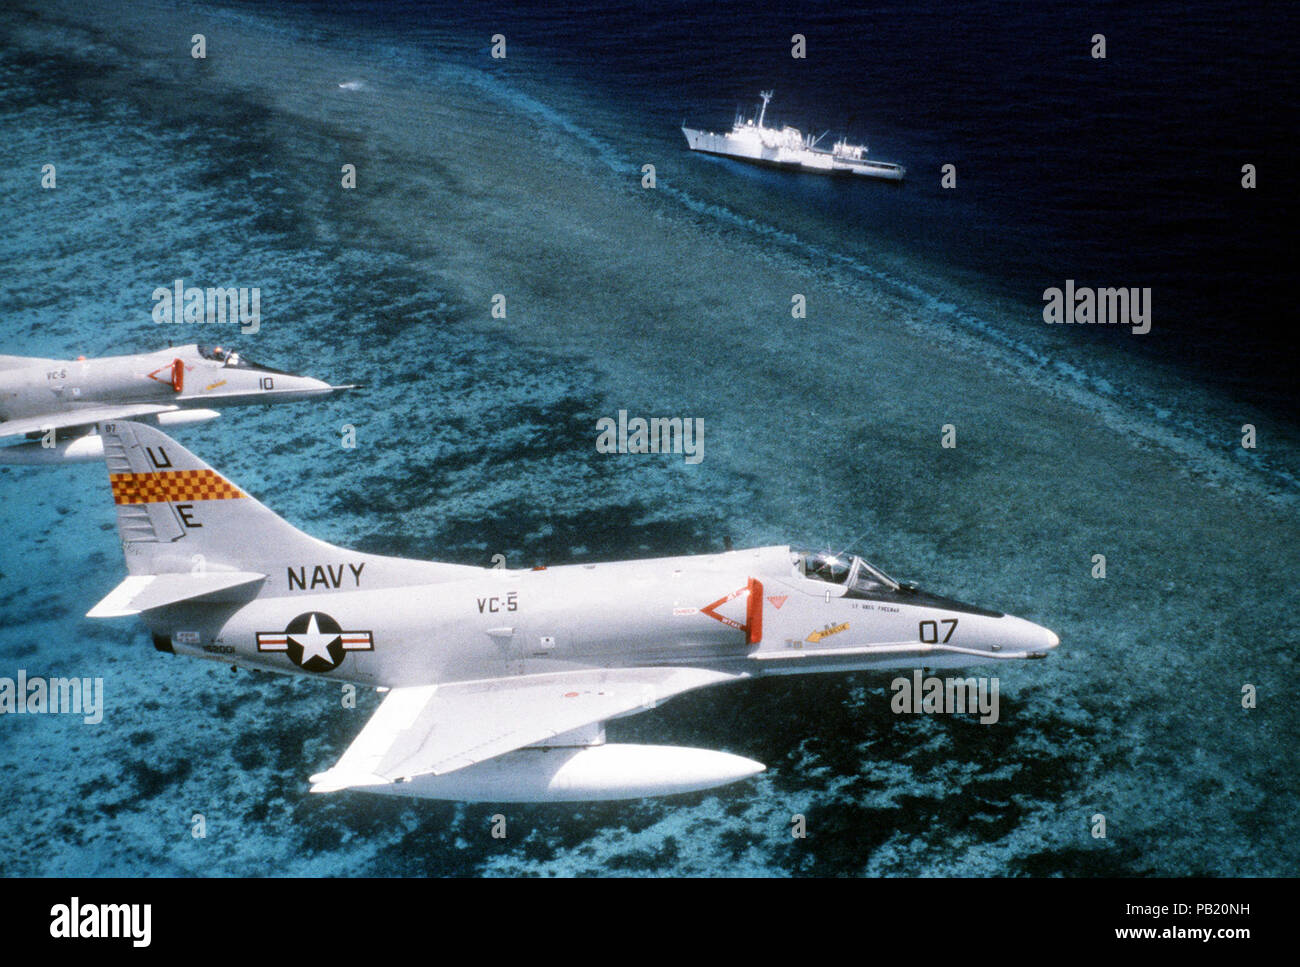 A-4Es of VC-5 in flight over USNS Chauvenet (T-AGS-29) 1981. Two Fleet Composite Squadron 5 (VC-5) A-4E Skyhawk aircraft fly over the surveying ship USNS CHAUVENET (T-AGS-29).  The CHAUVENET has run aground on a reef. Stock Photo